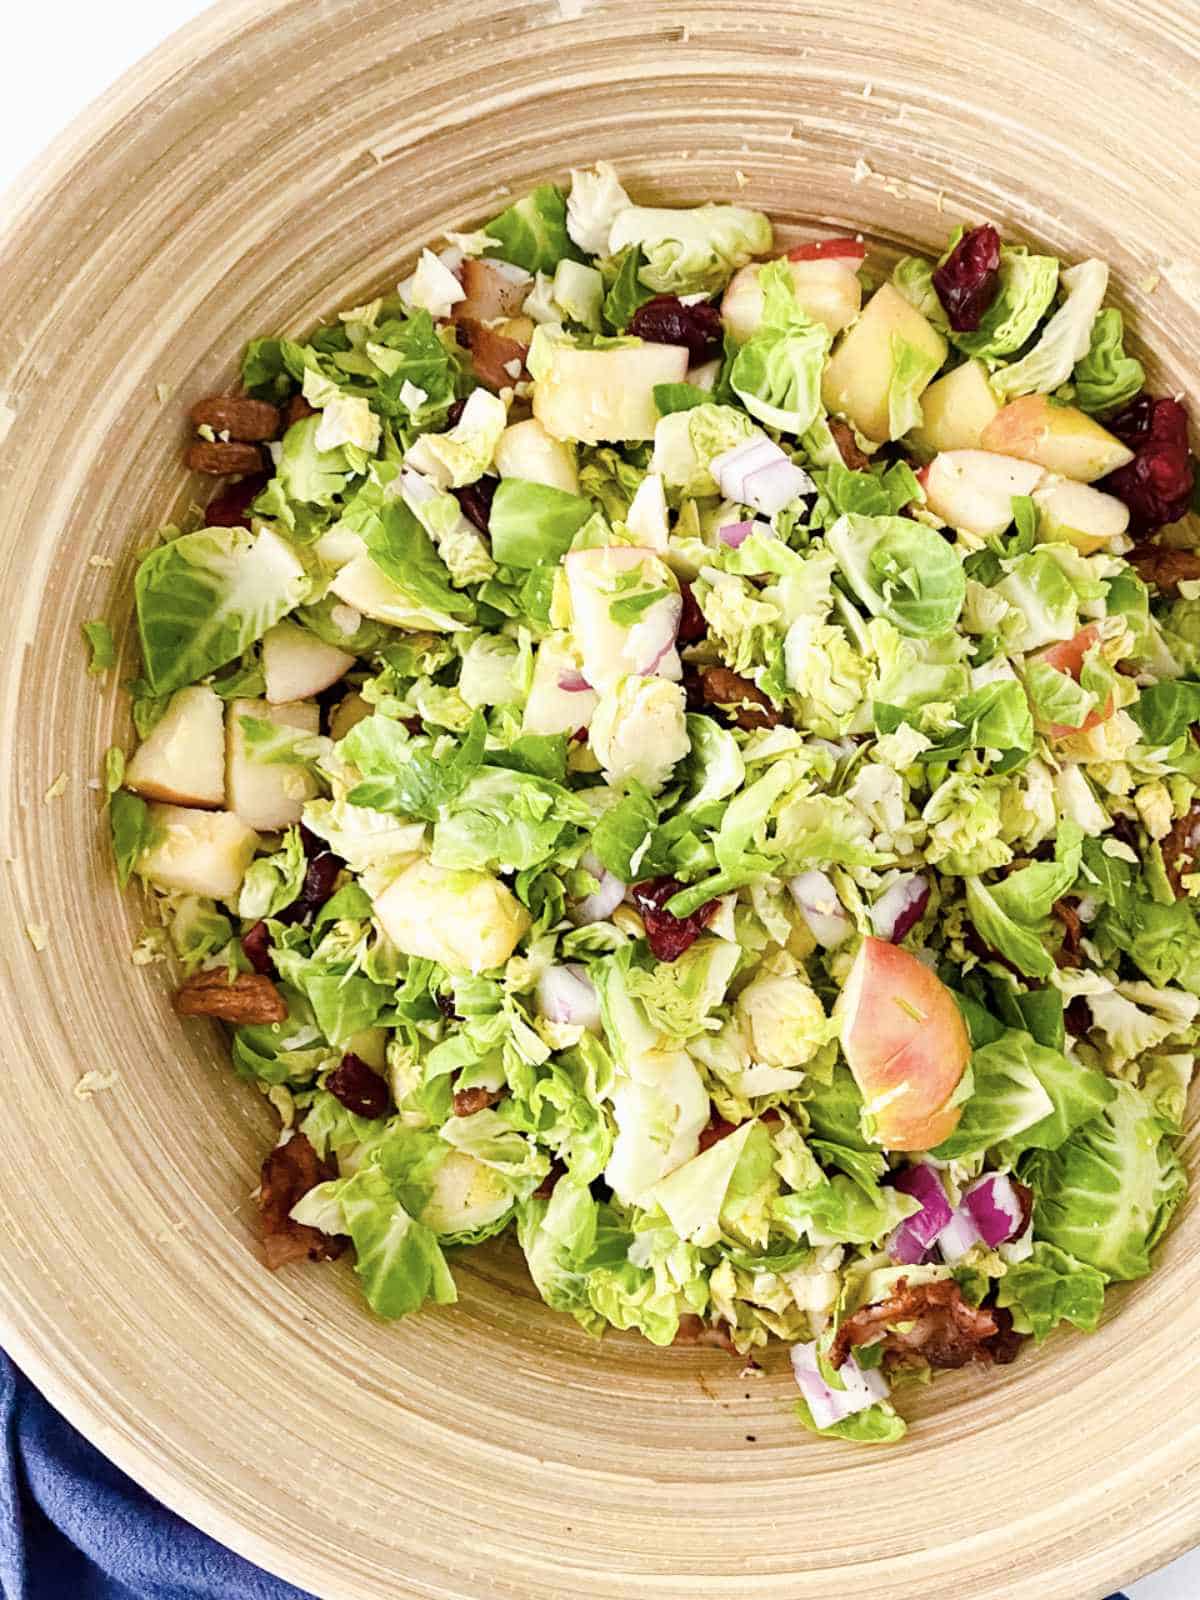 Tossed warm brussel sprout salad.